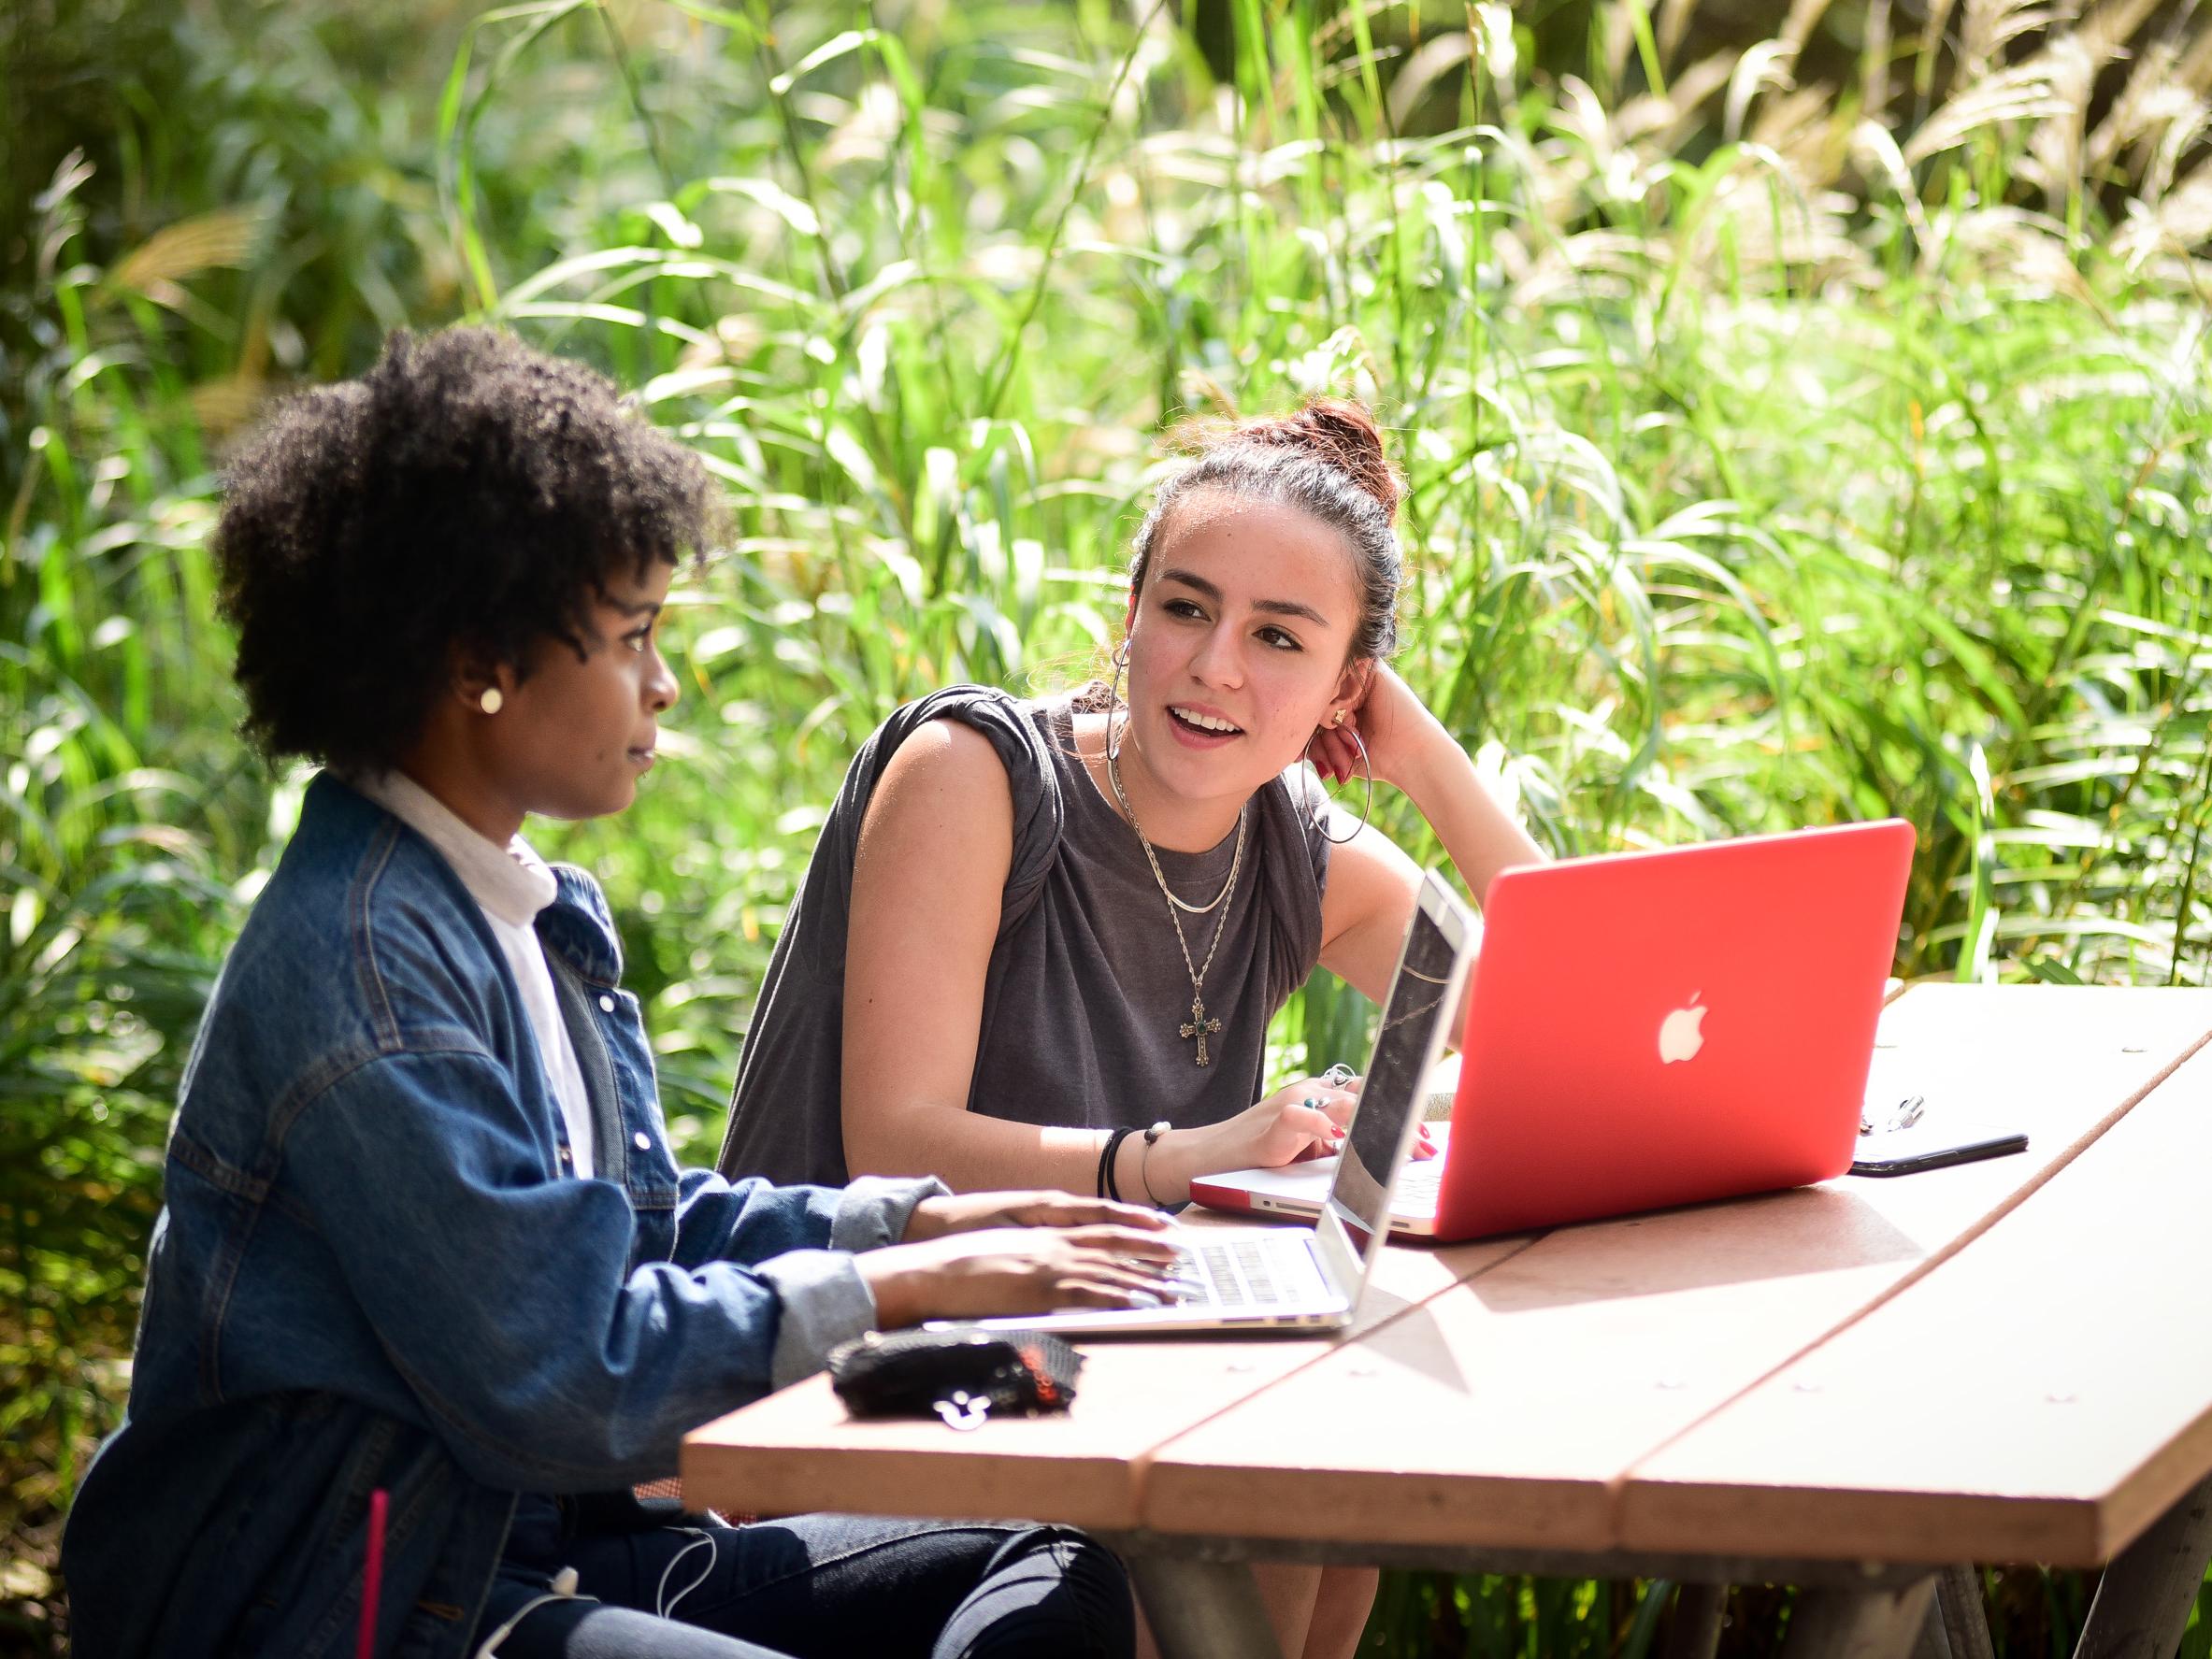 2 diverse students having a discussion at a picnic table with laptops open and ornamental grass in background